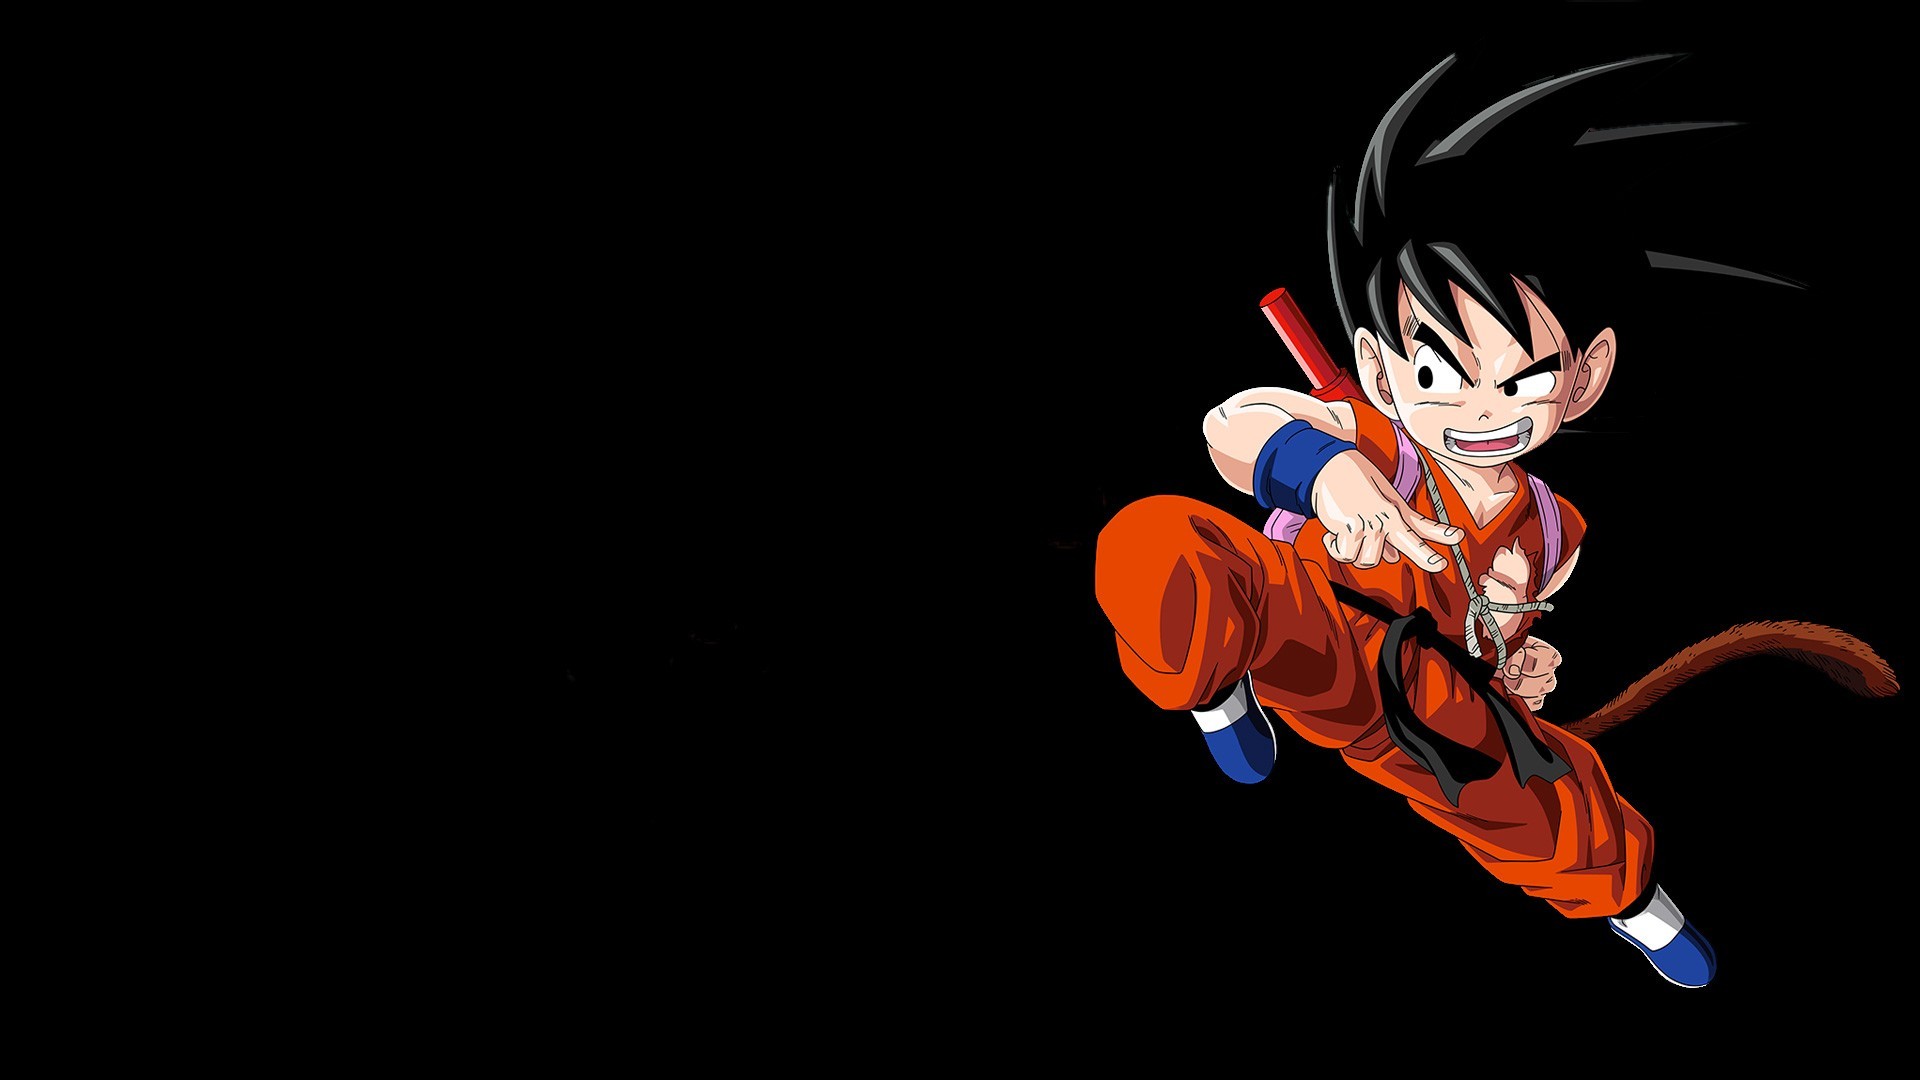 HD Kid Goku Backgrounds with resolution 1920X1080 pixel. You can use this wallpaper as background for your desktop Computer Screensavers, Android or iPhone smartphones